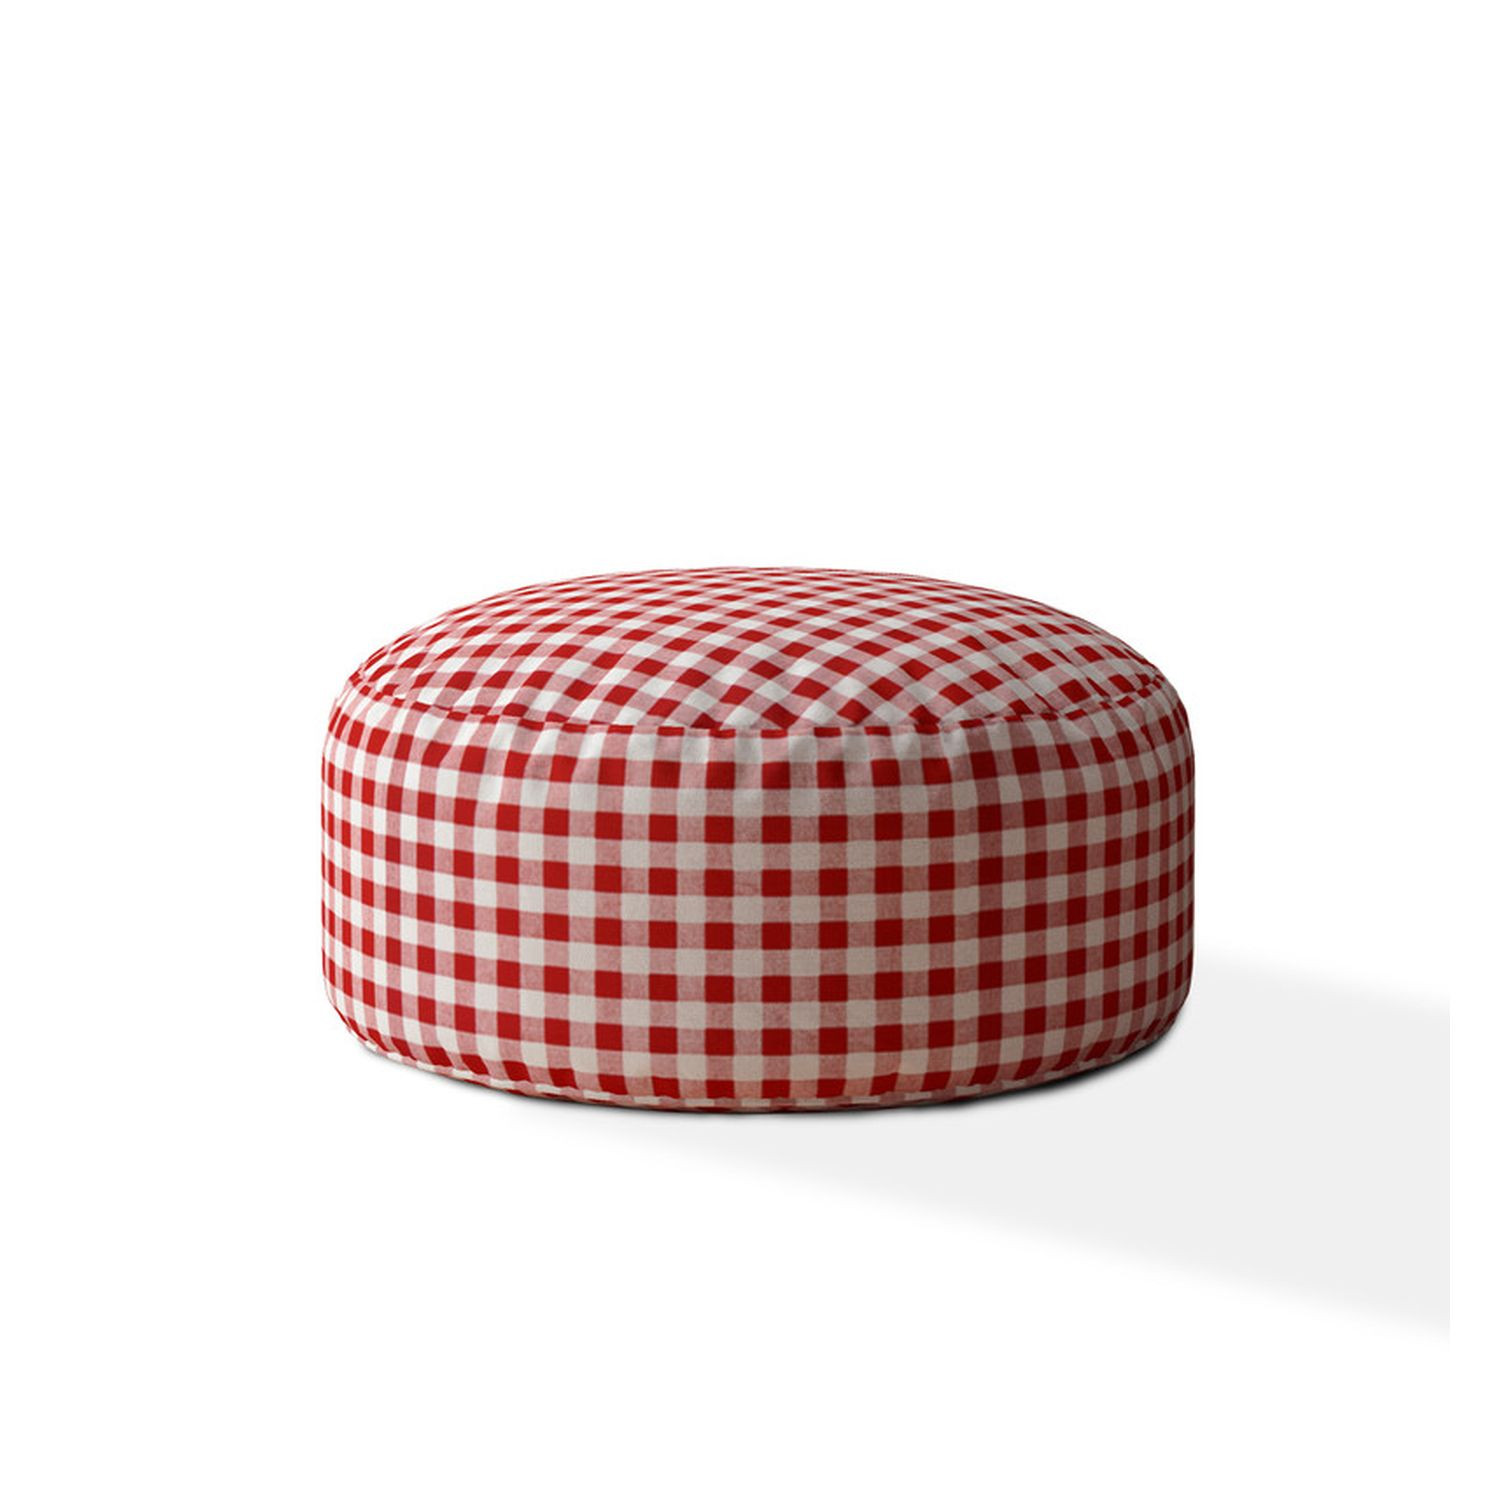 24" Red And White Cotton Round Gingham Pouf Cover-518504-1